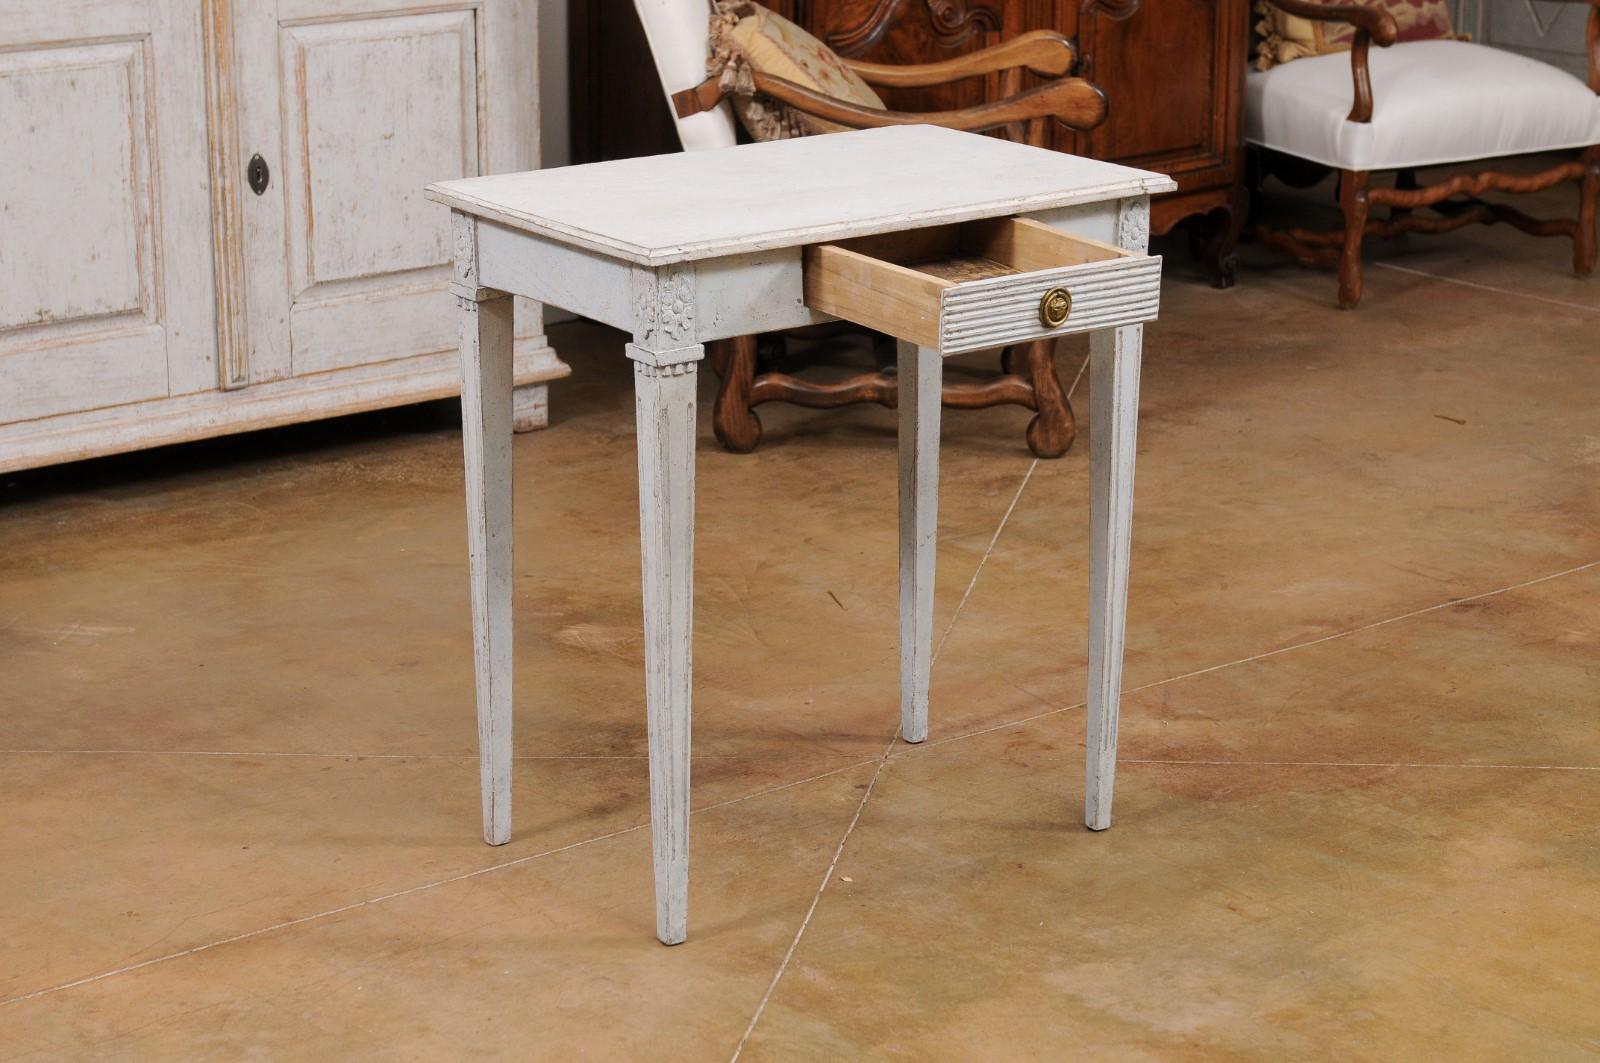 A Swedish Gustavian style console table from the late 19th century, with single fluted drawer and carved rosettes. Created in Sweden during the last quarter of the 19th century, this Gustavian style console table features a rectangular top sitting